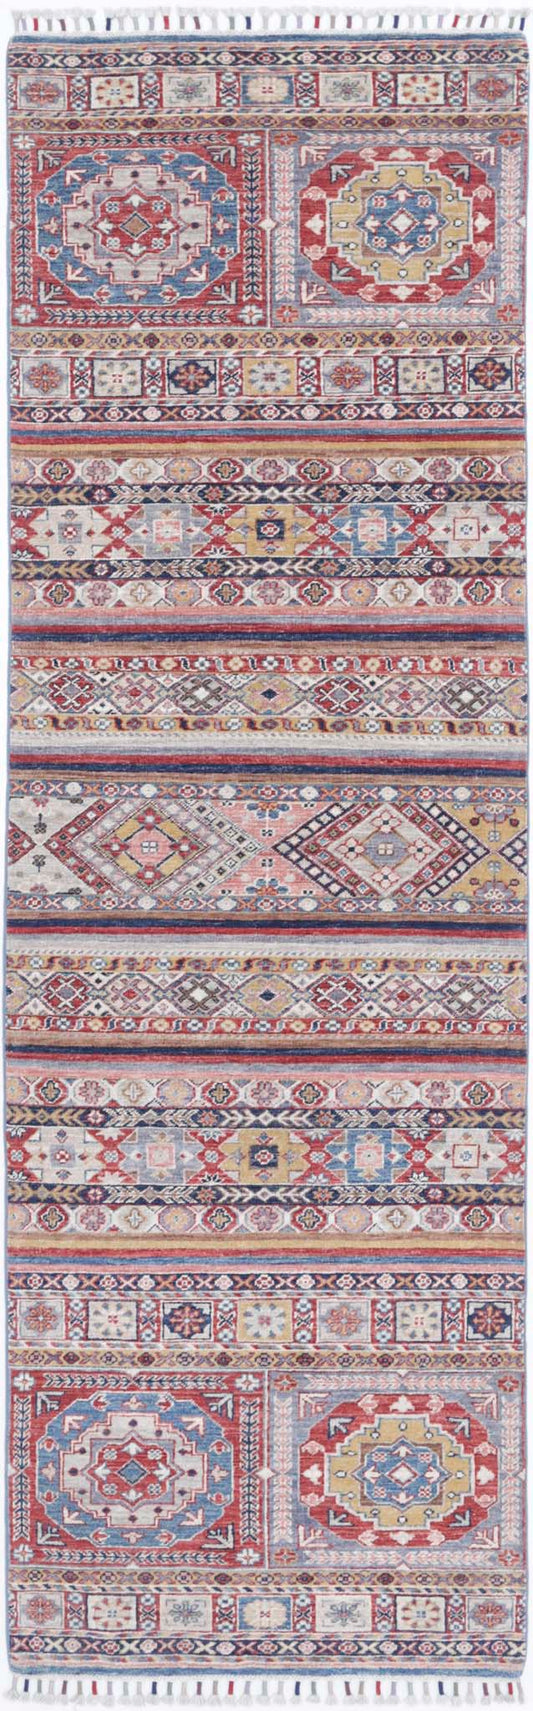 Hand Knotted Khurjeen Wool Rug - 2'9'' x 9'8''